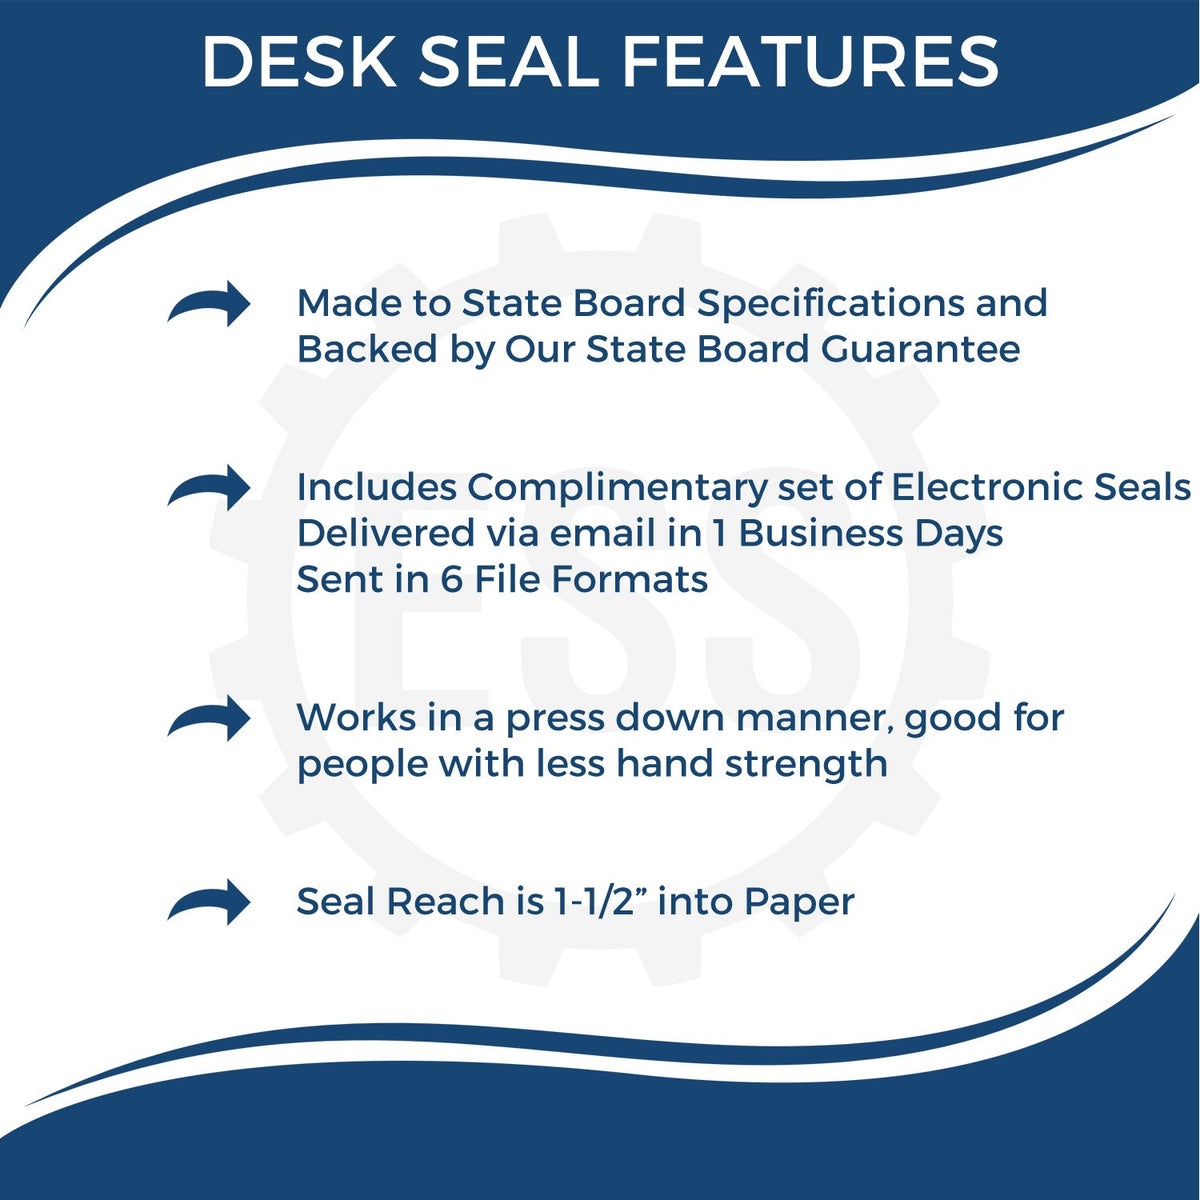 A picture of an infographic highlighting the selling points for the Virginia Geologist Desk Seal